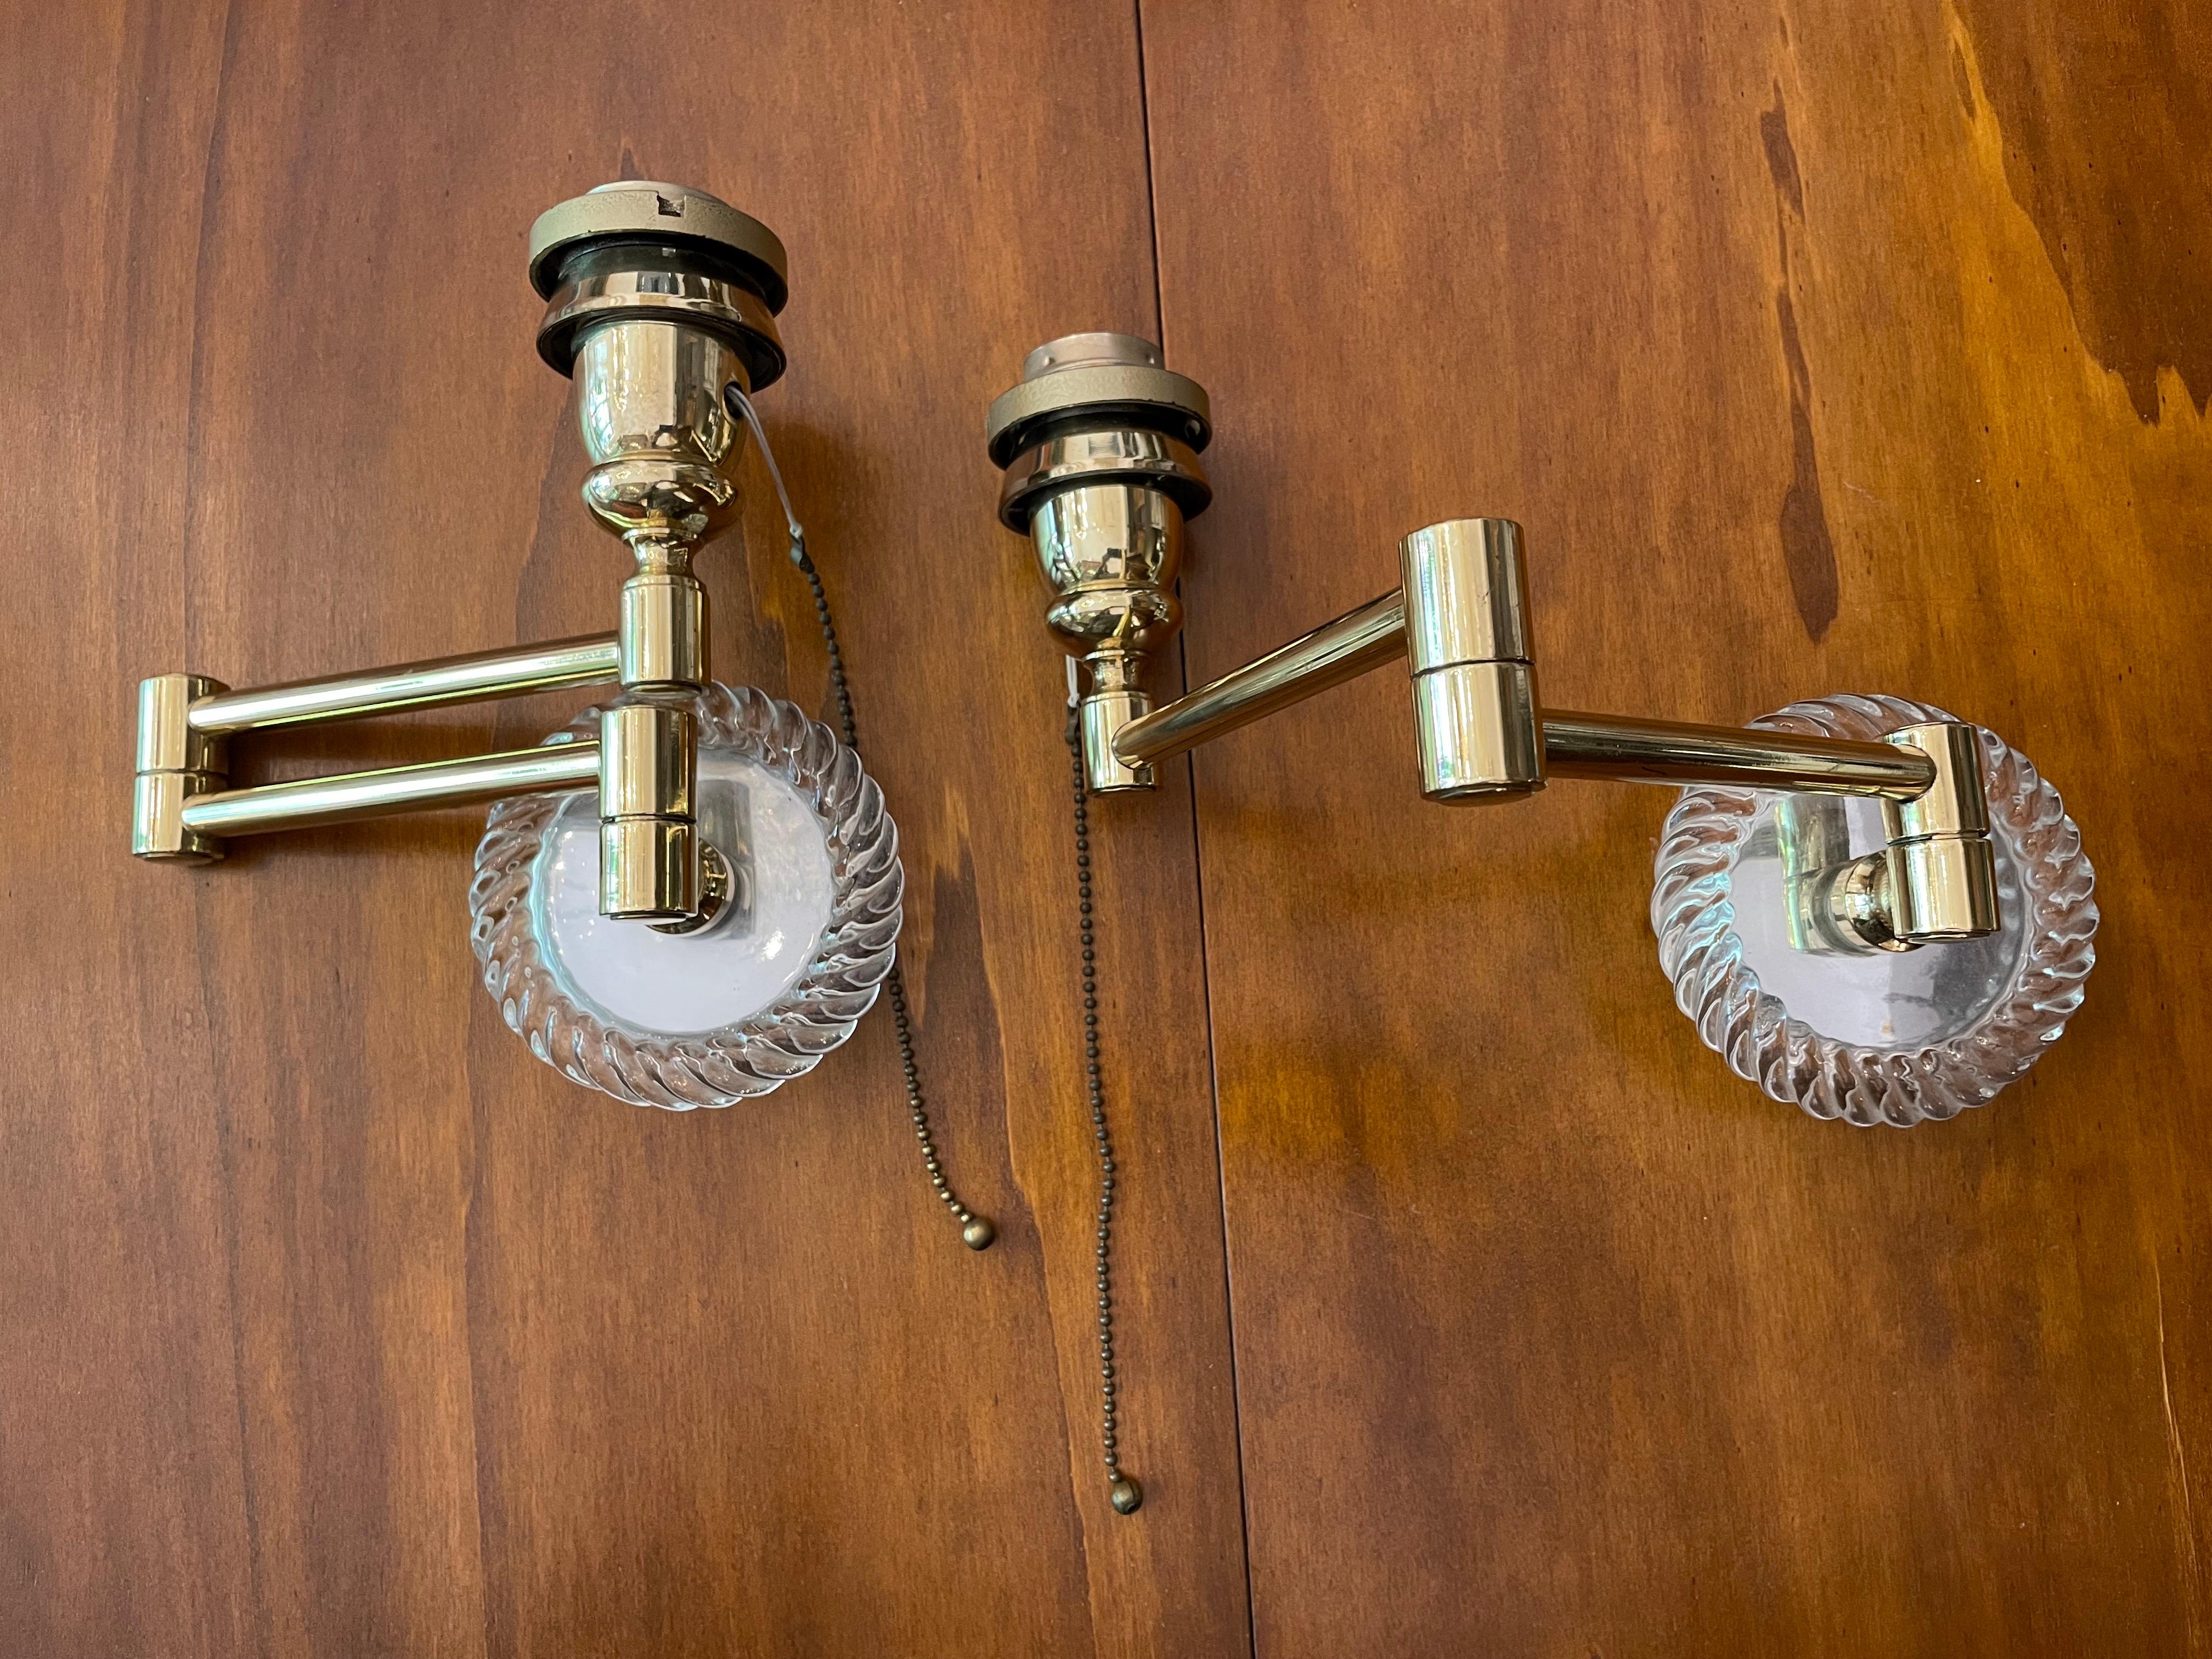 Brass Italian Florentine Pair of Wall Lights Extensible Sconces by Banci 1980s For Sale